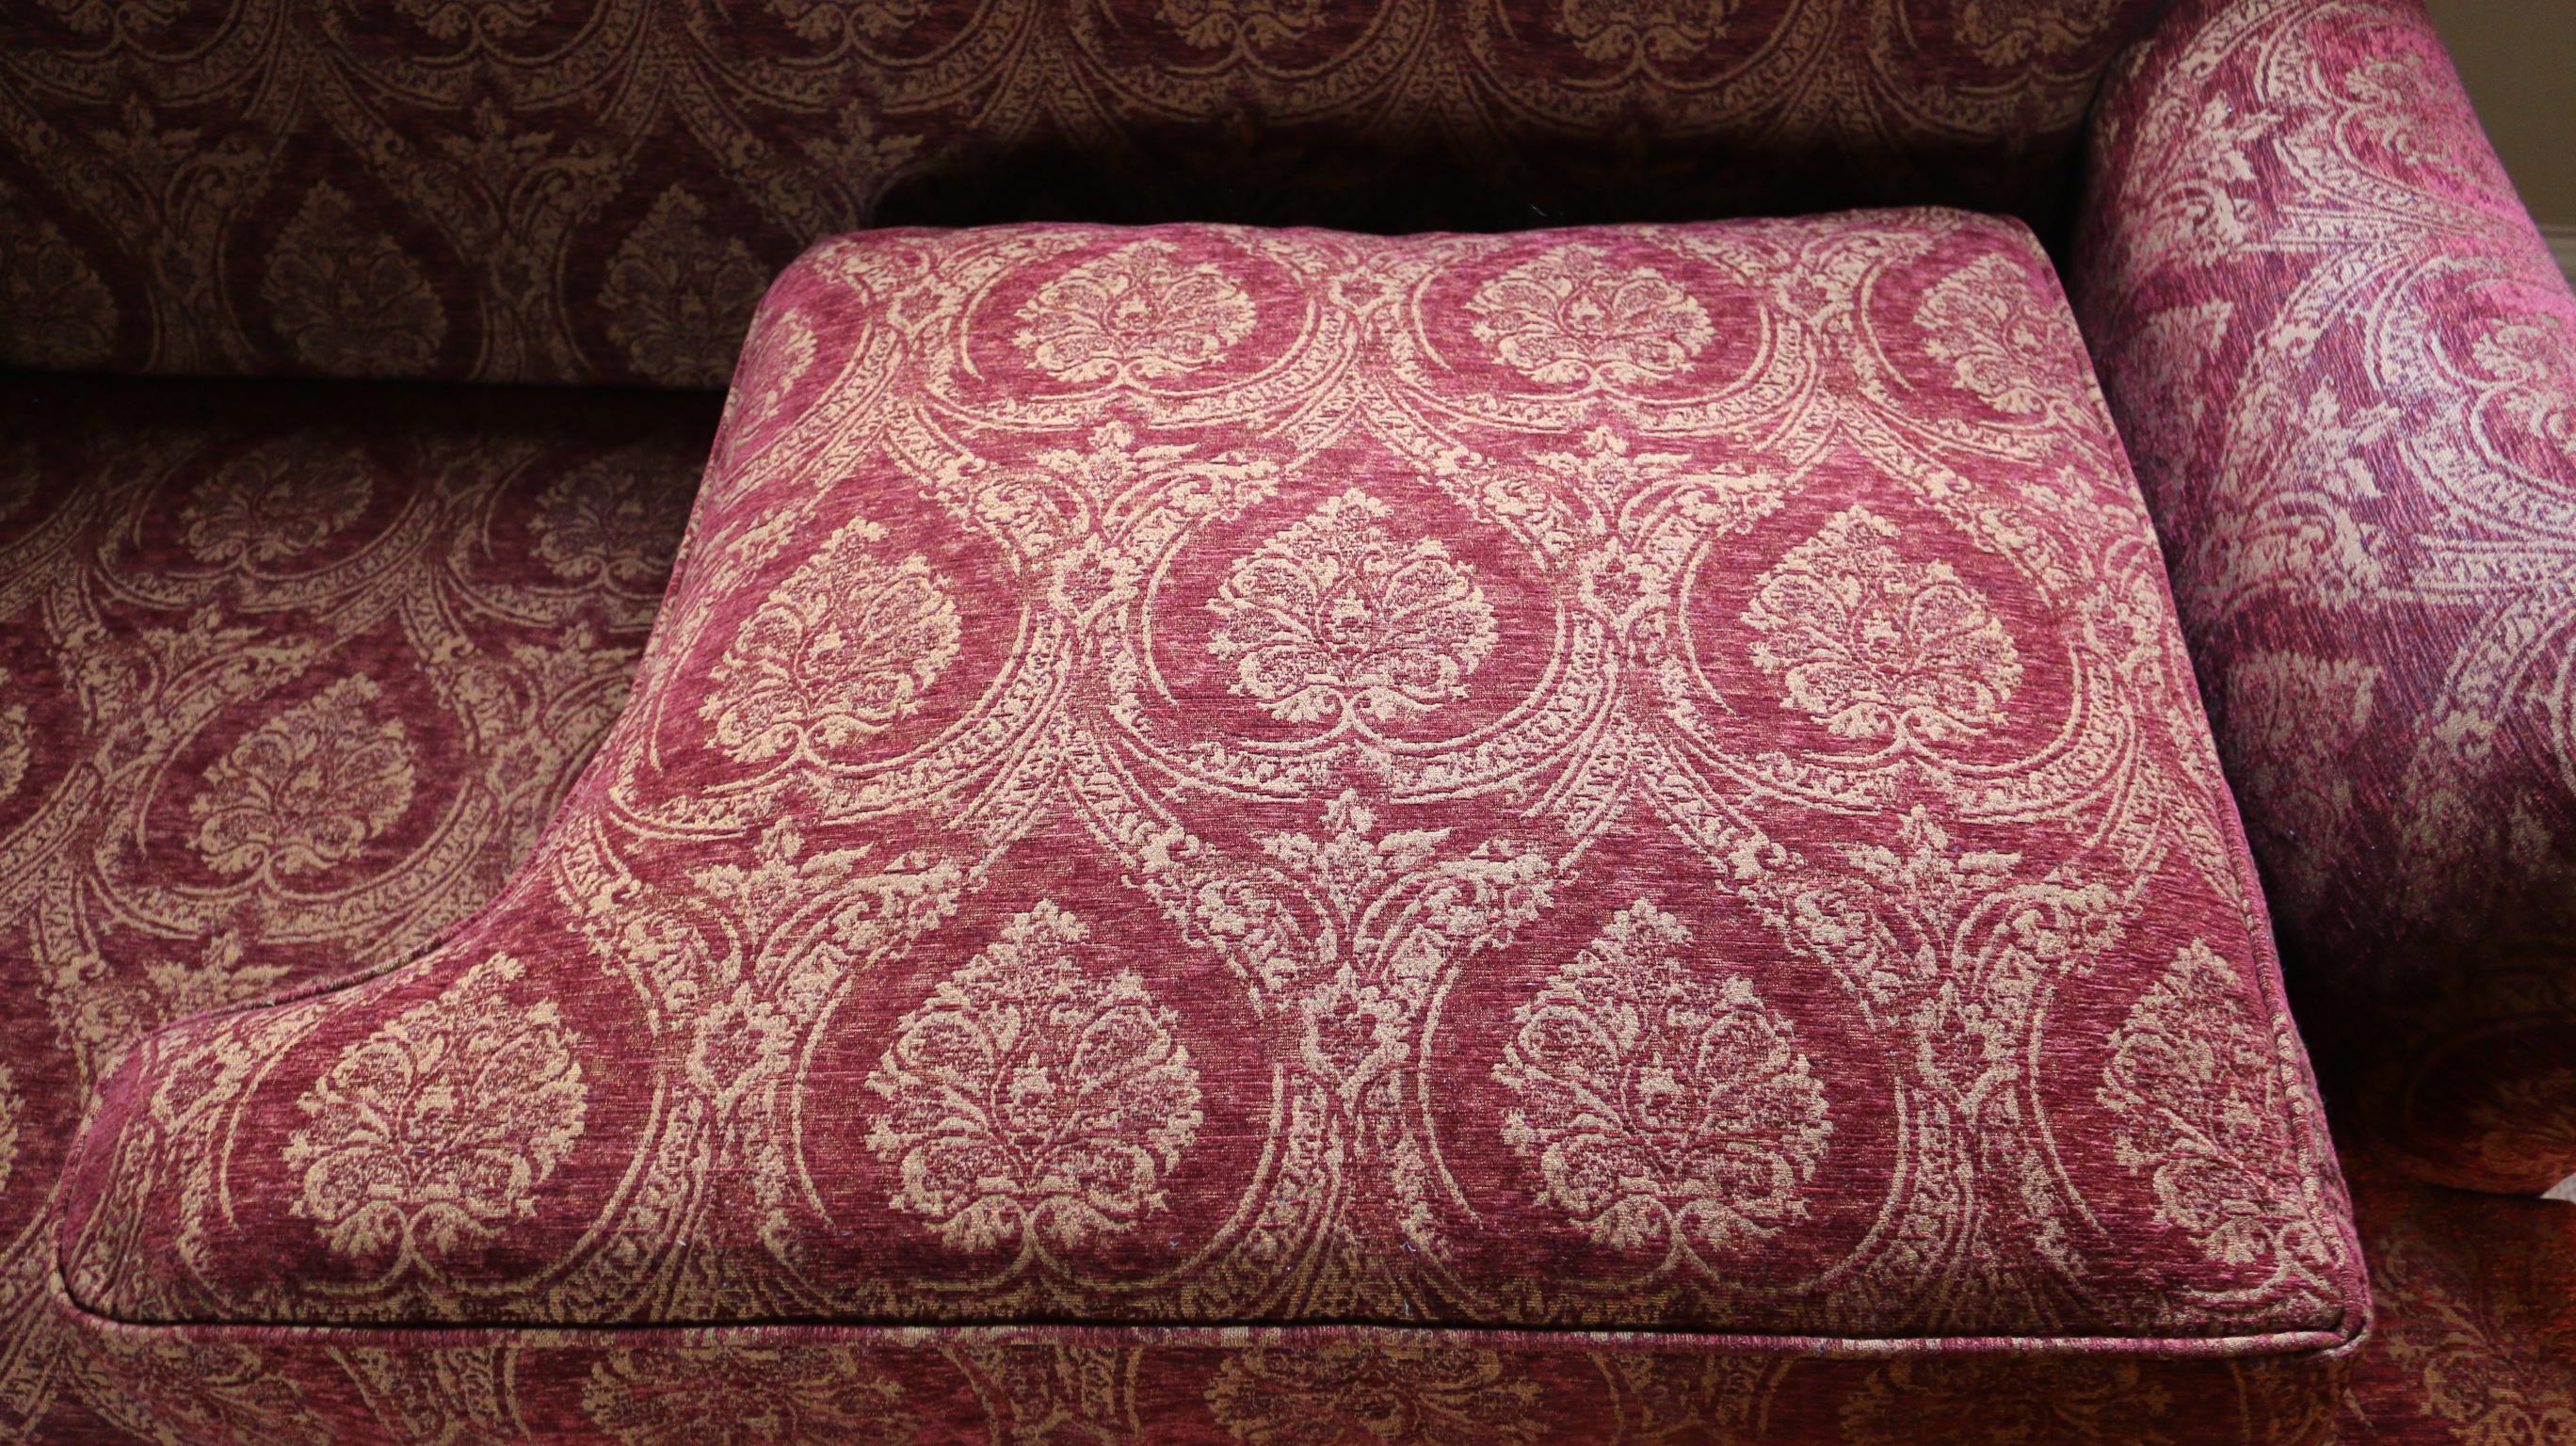 Textile Settee Sofa 3-Seat Howard Parker & Farr Red-Wine Gold Mulberry Paisley